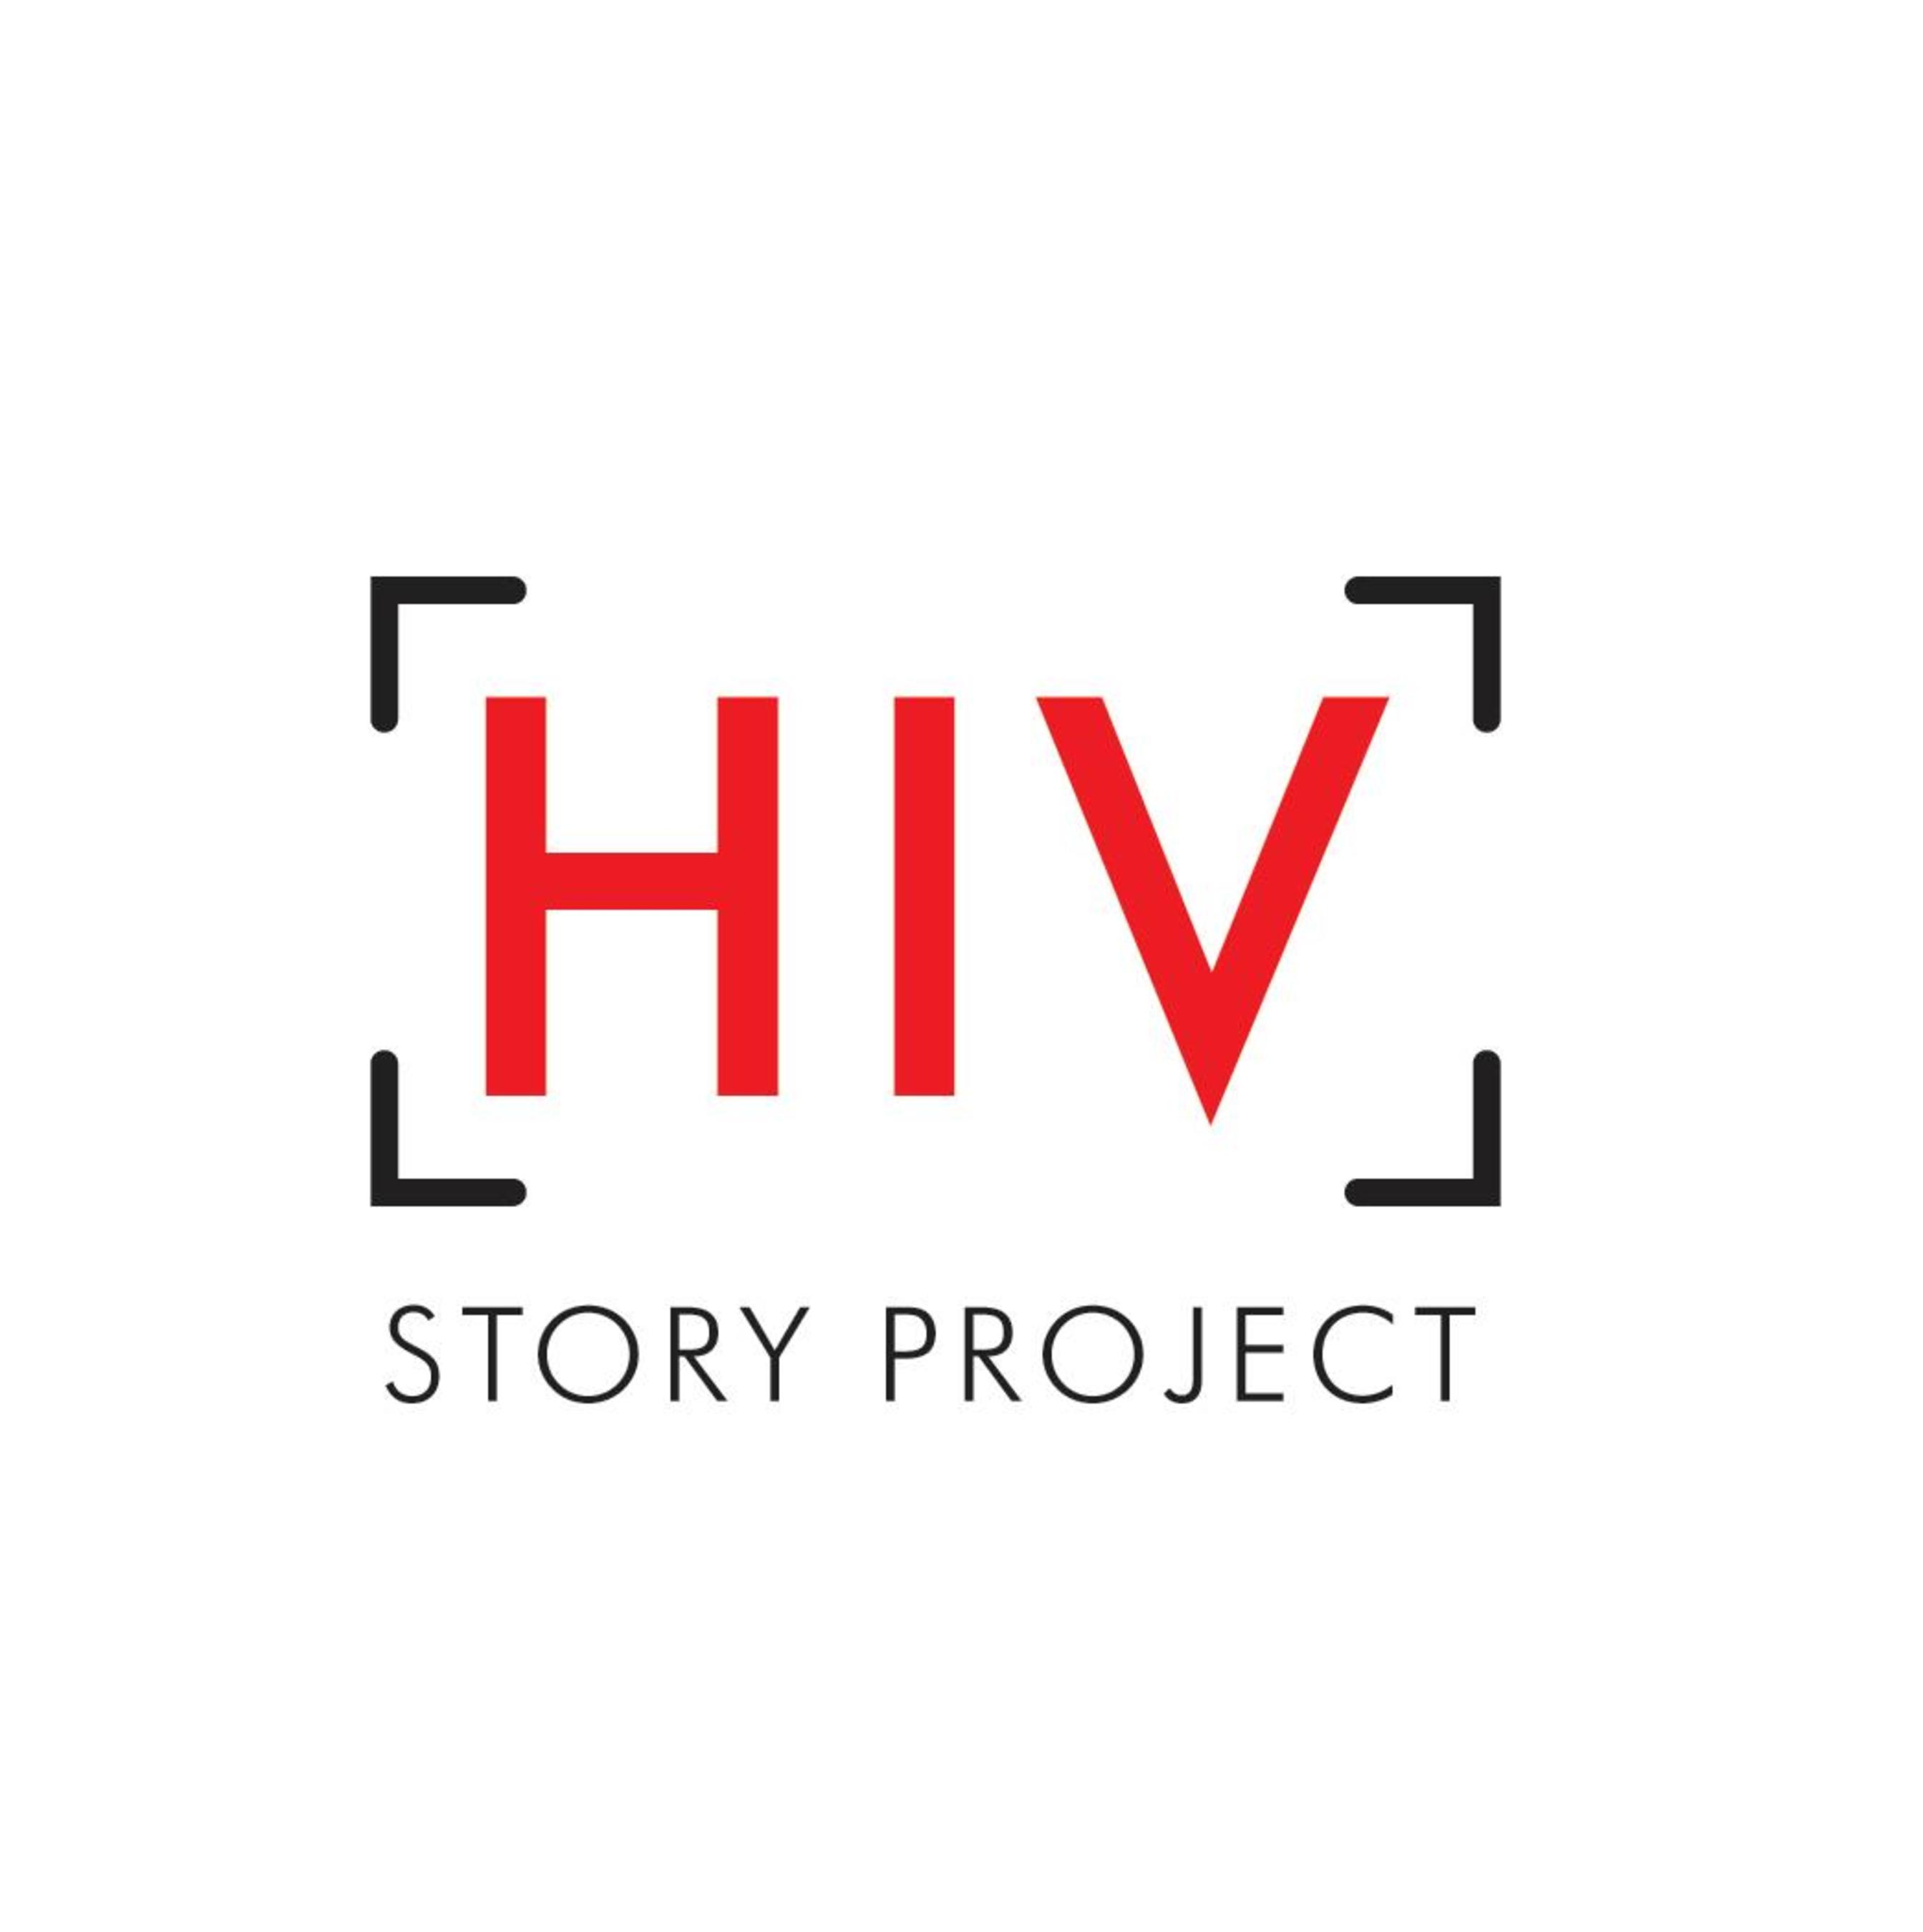 The HIV Story Project